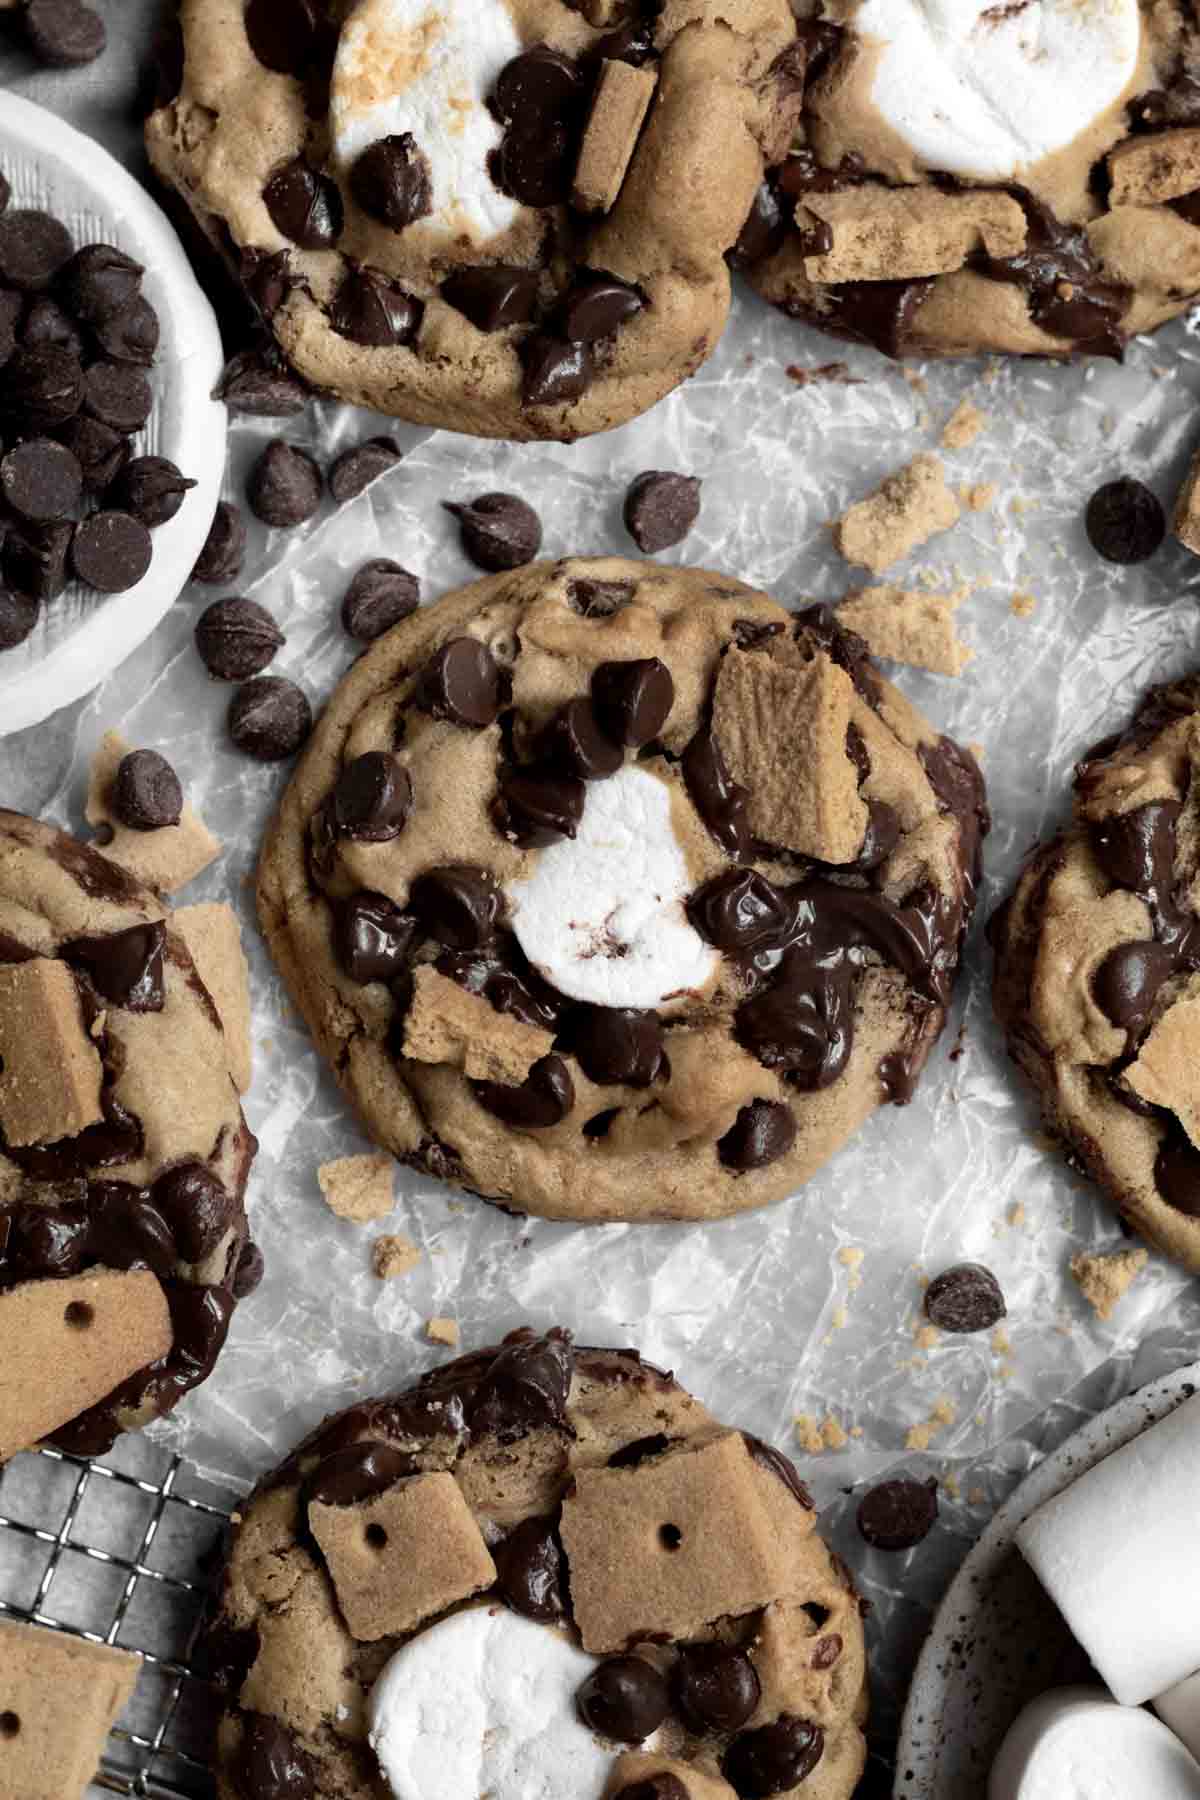 S'mores cookies arranged on paper.